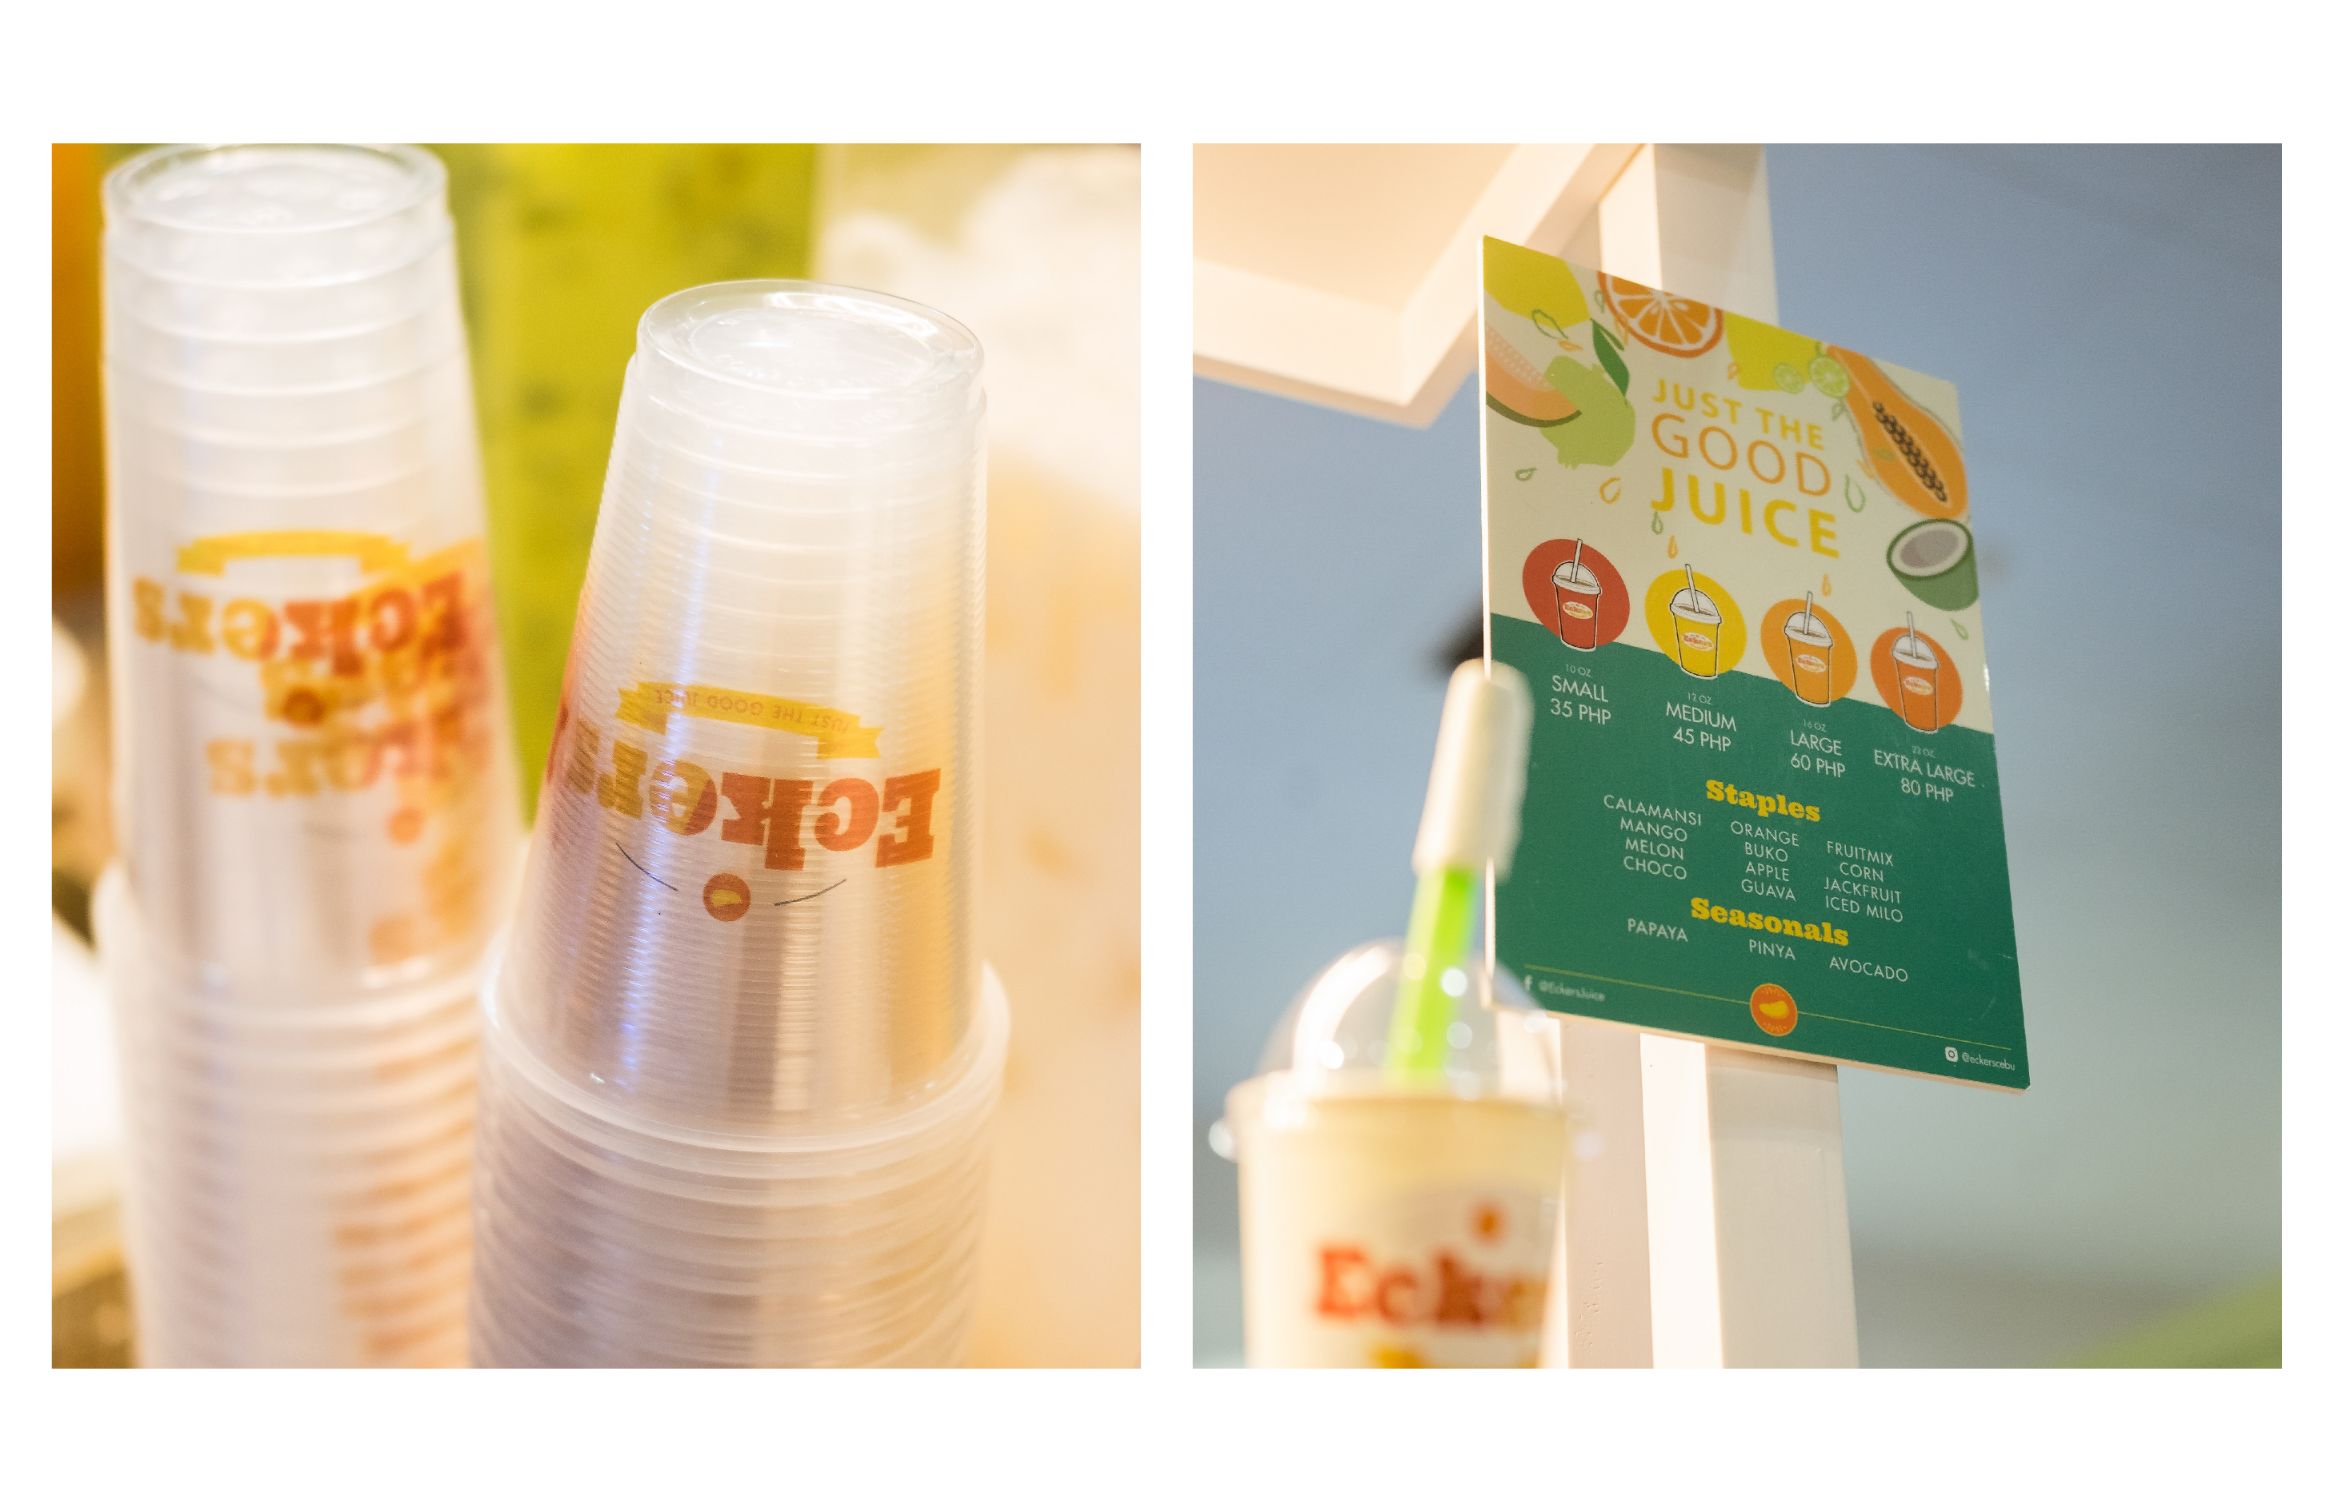 Images of the Kiosk, menu design, cups and products of the brand